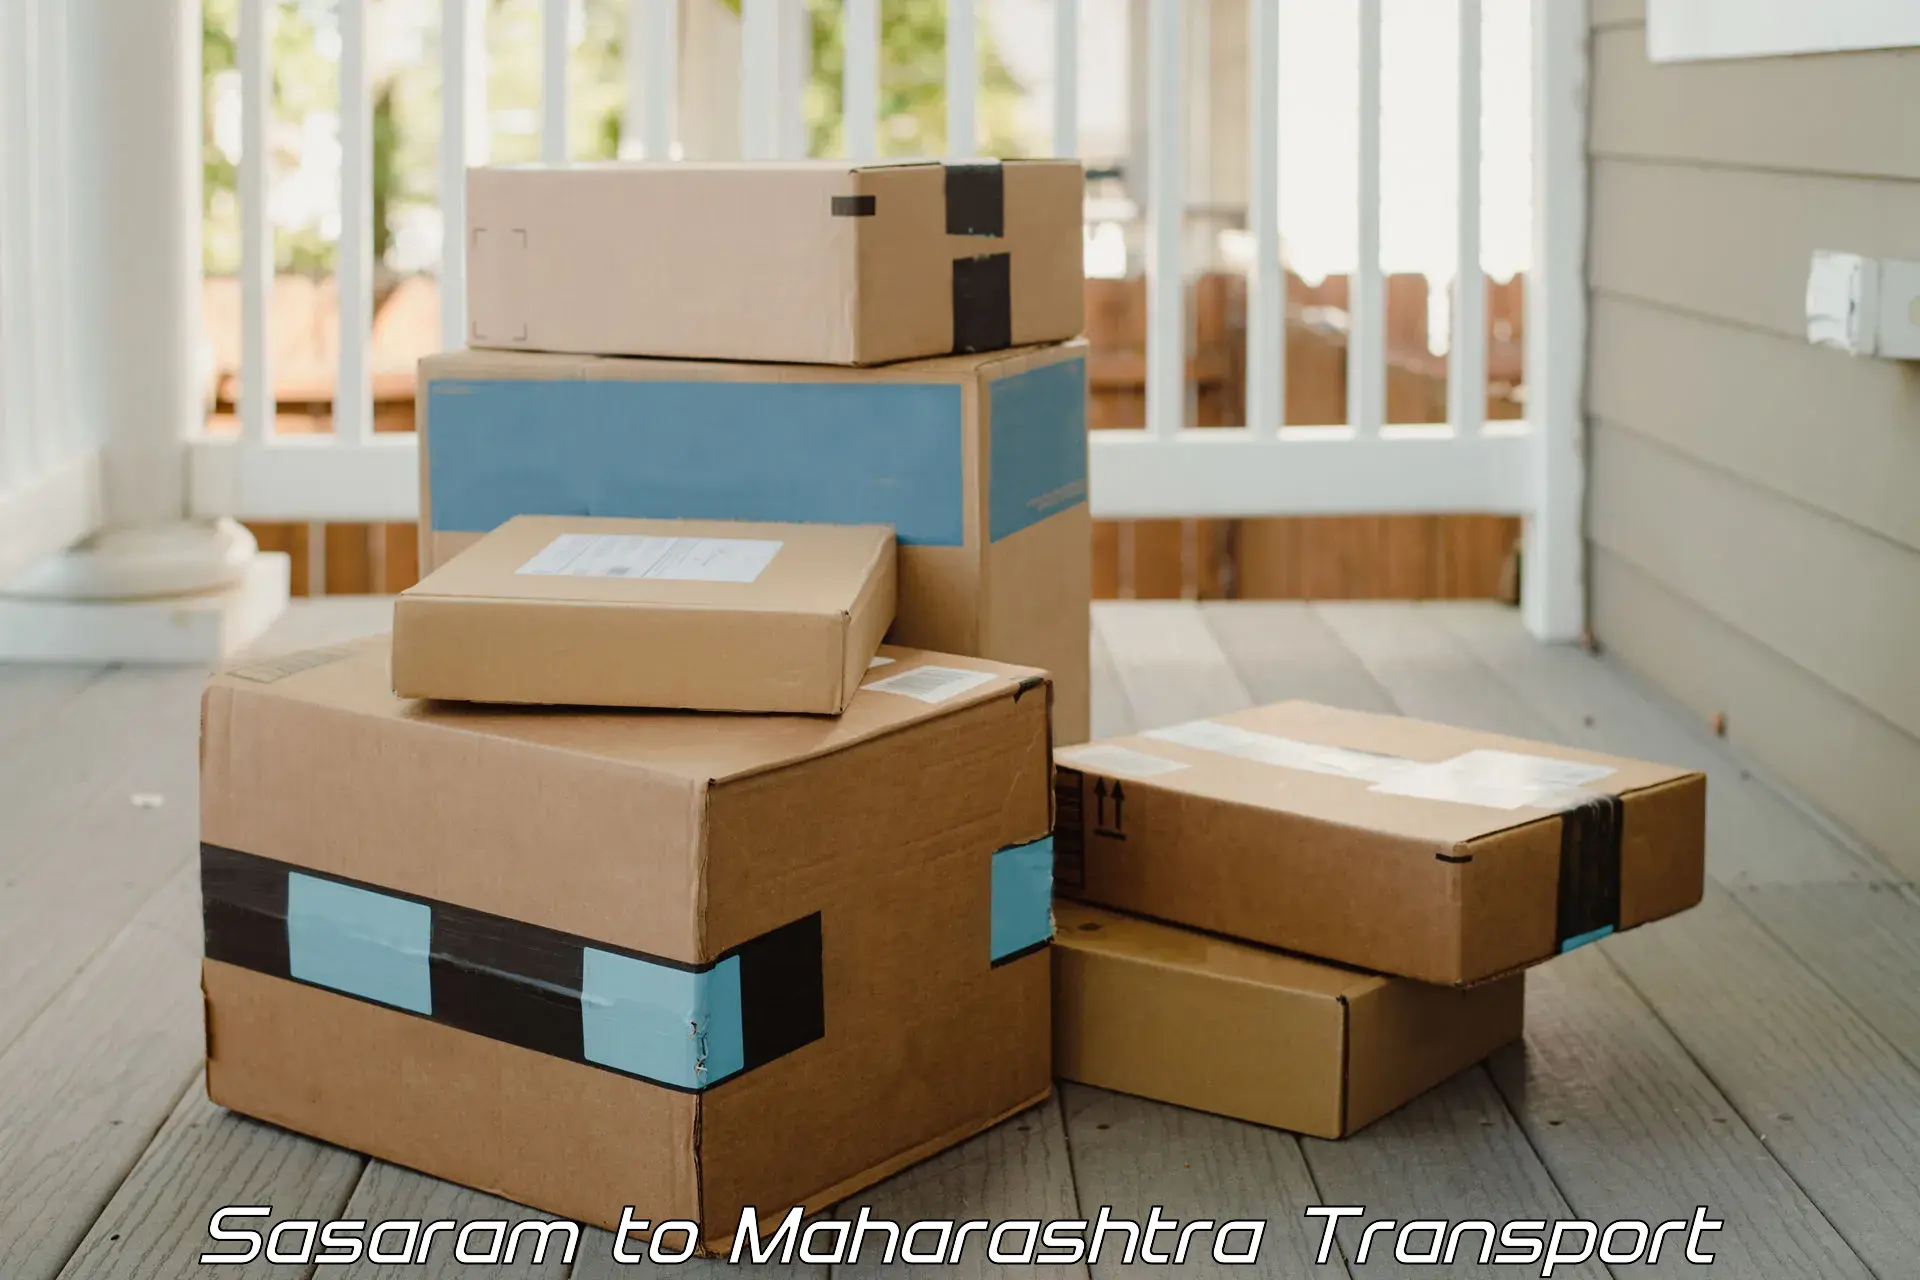 Truck transport companies in India Sasaram to Nanded